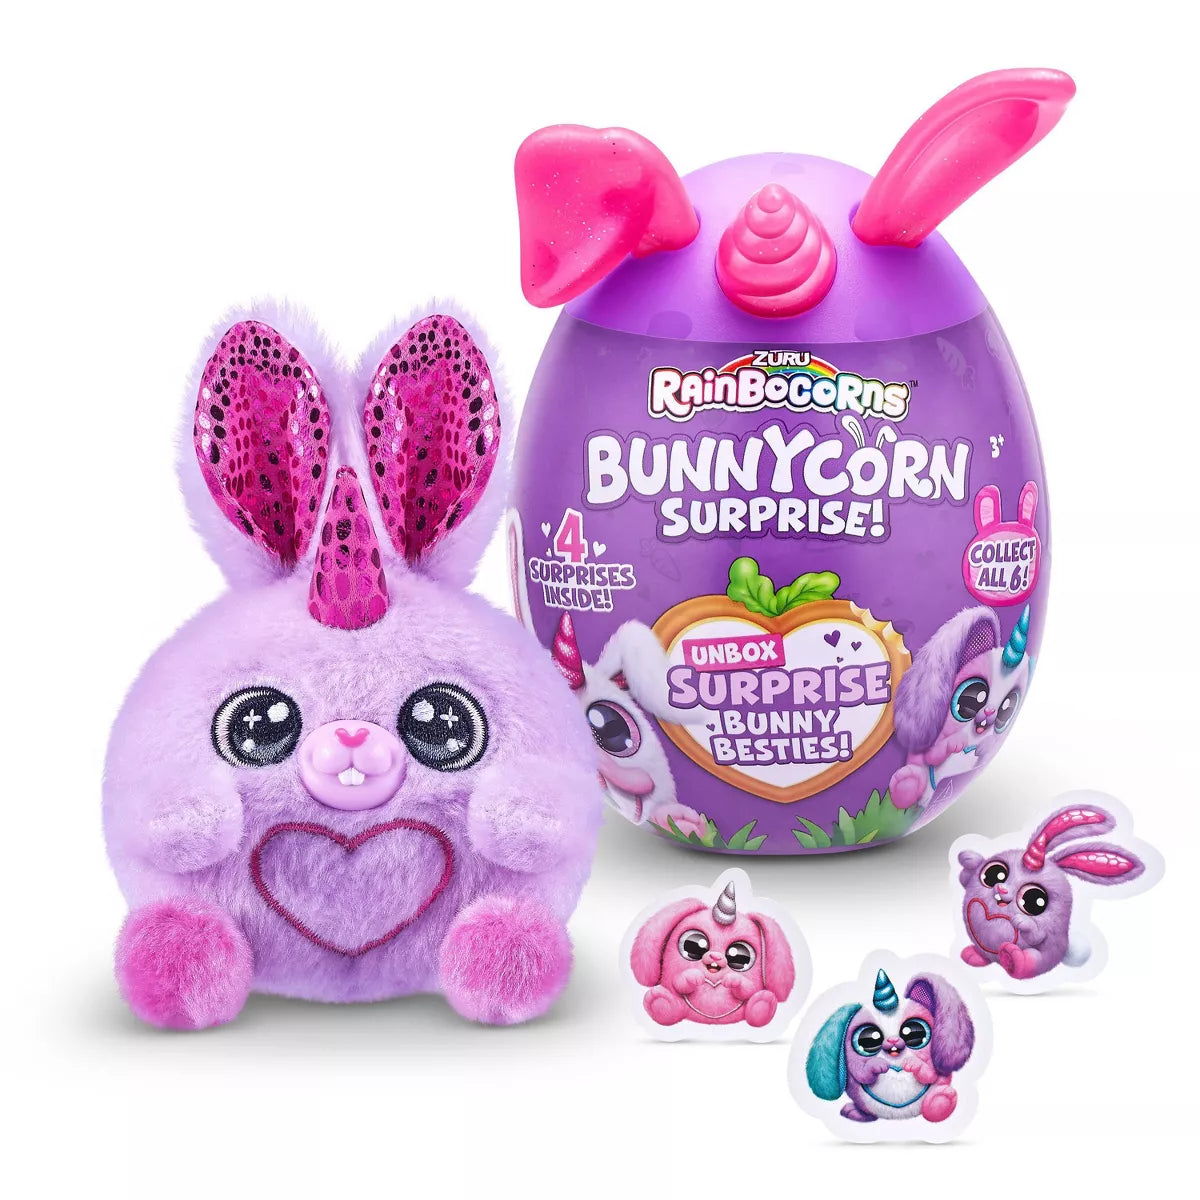 ADOPT ME! Surprise PURPLE Egg Plush Pets (Series 1) *1 Of 4 Mystery Pets &  Code*